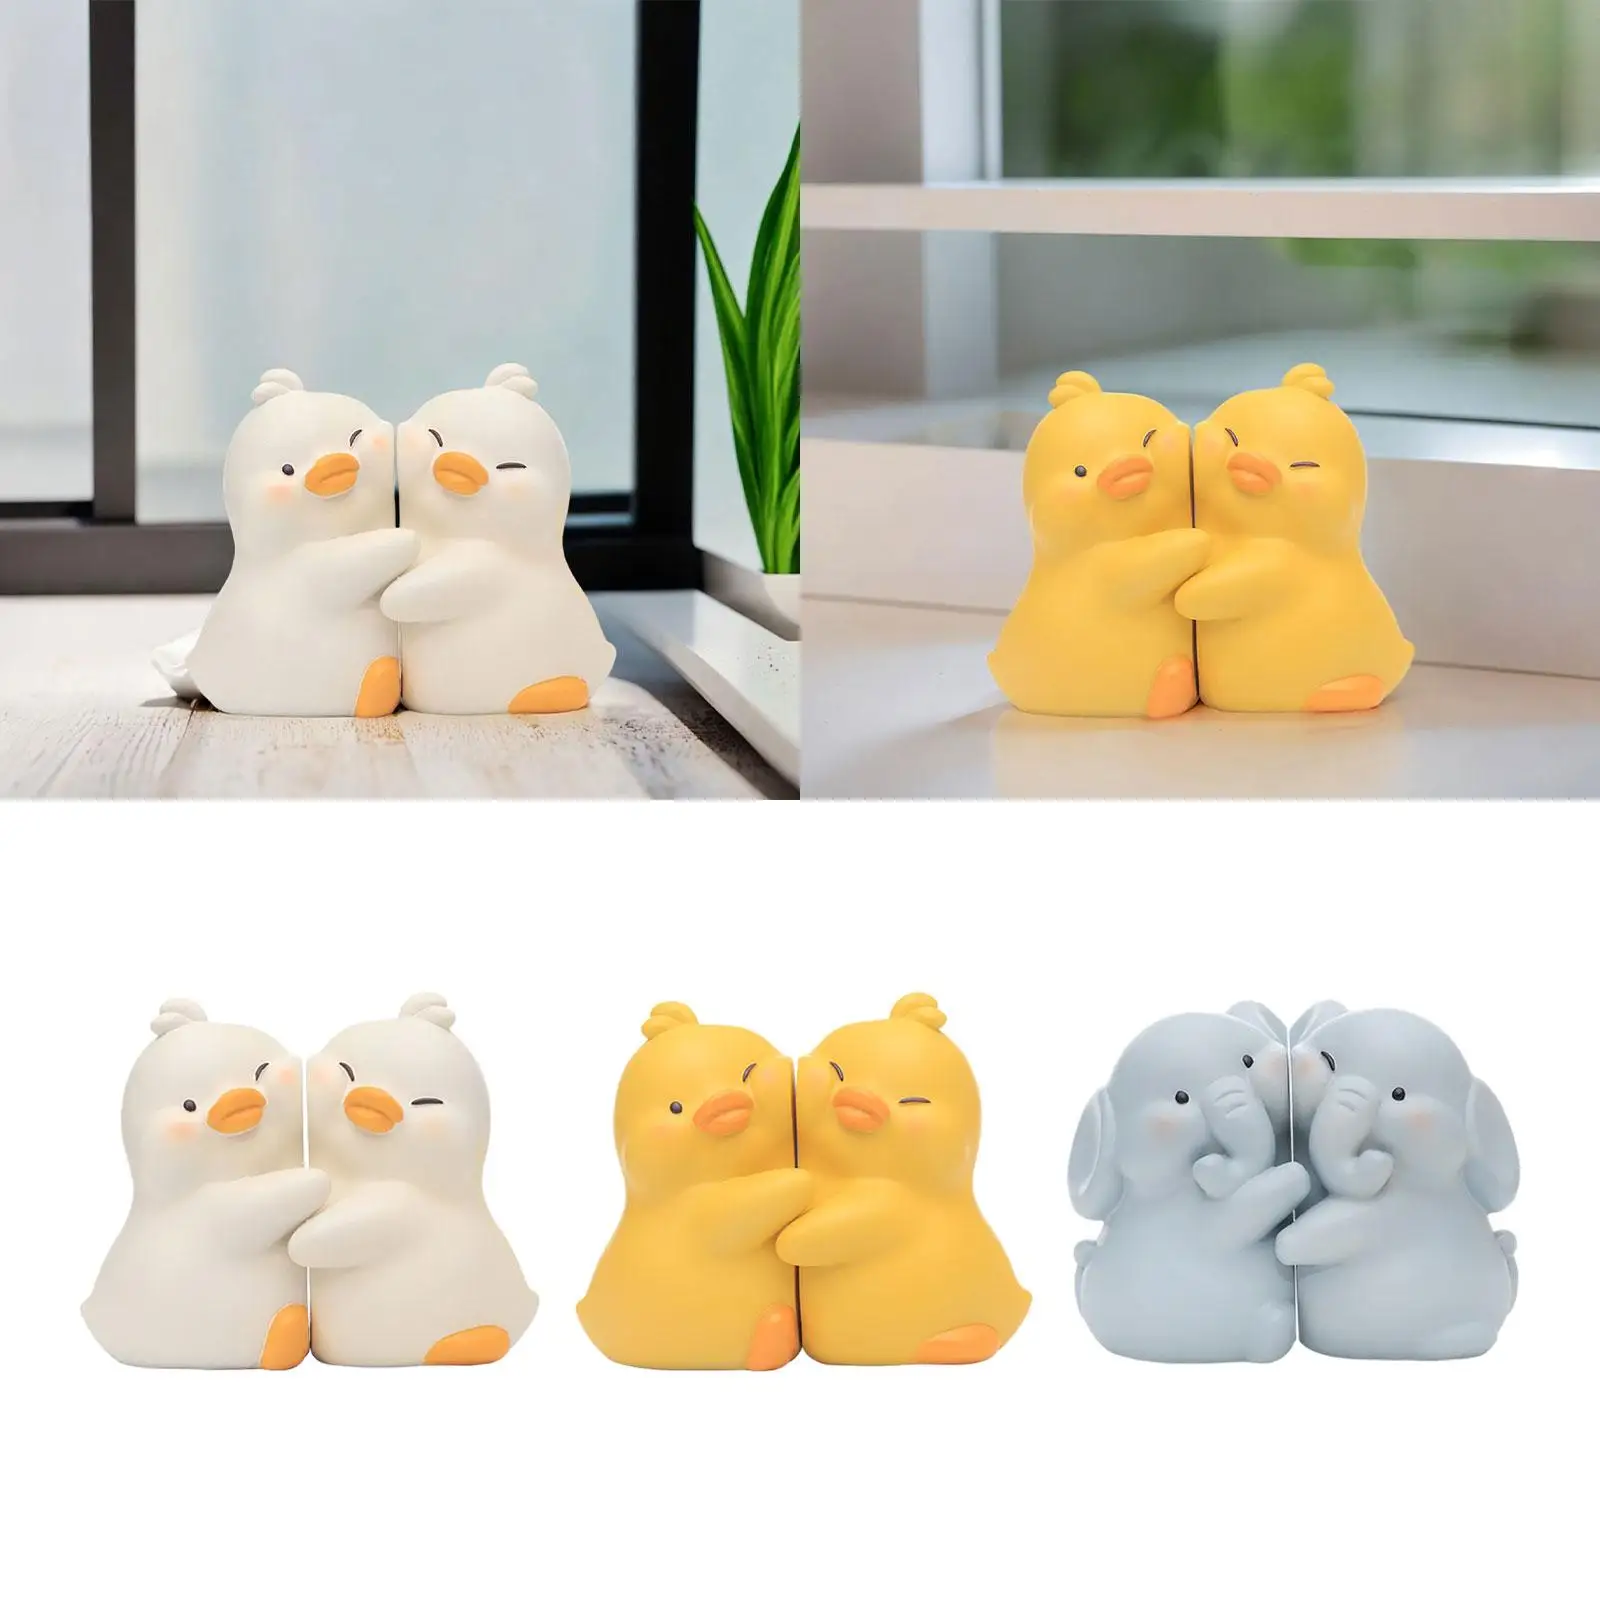 Cute Animal Decorative Bookends Book Organizer Modern Office Desk Accessories Creative Gifts Resin Office Home Decor Book Holder